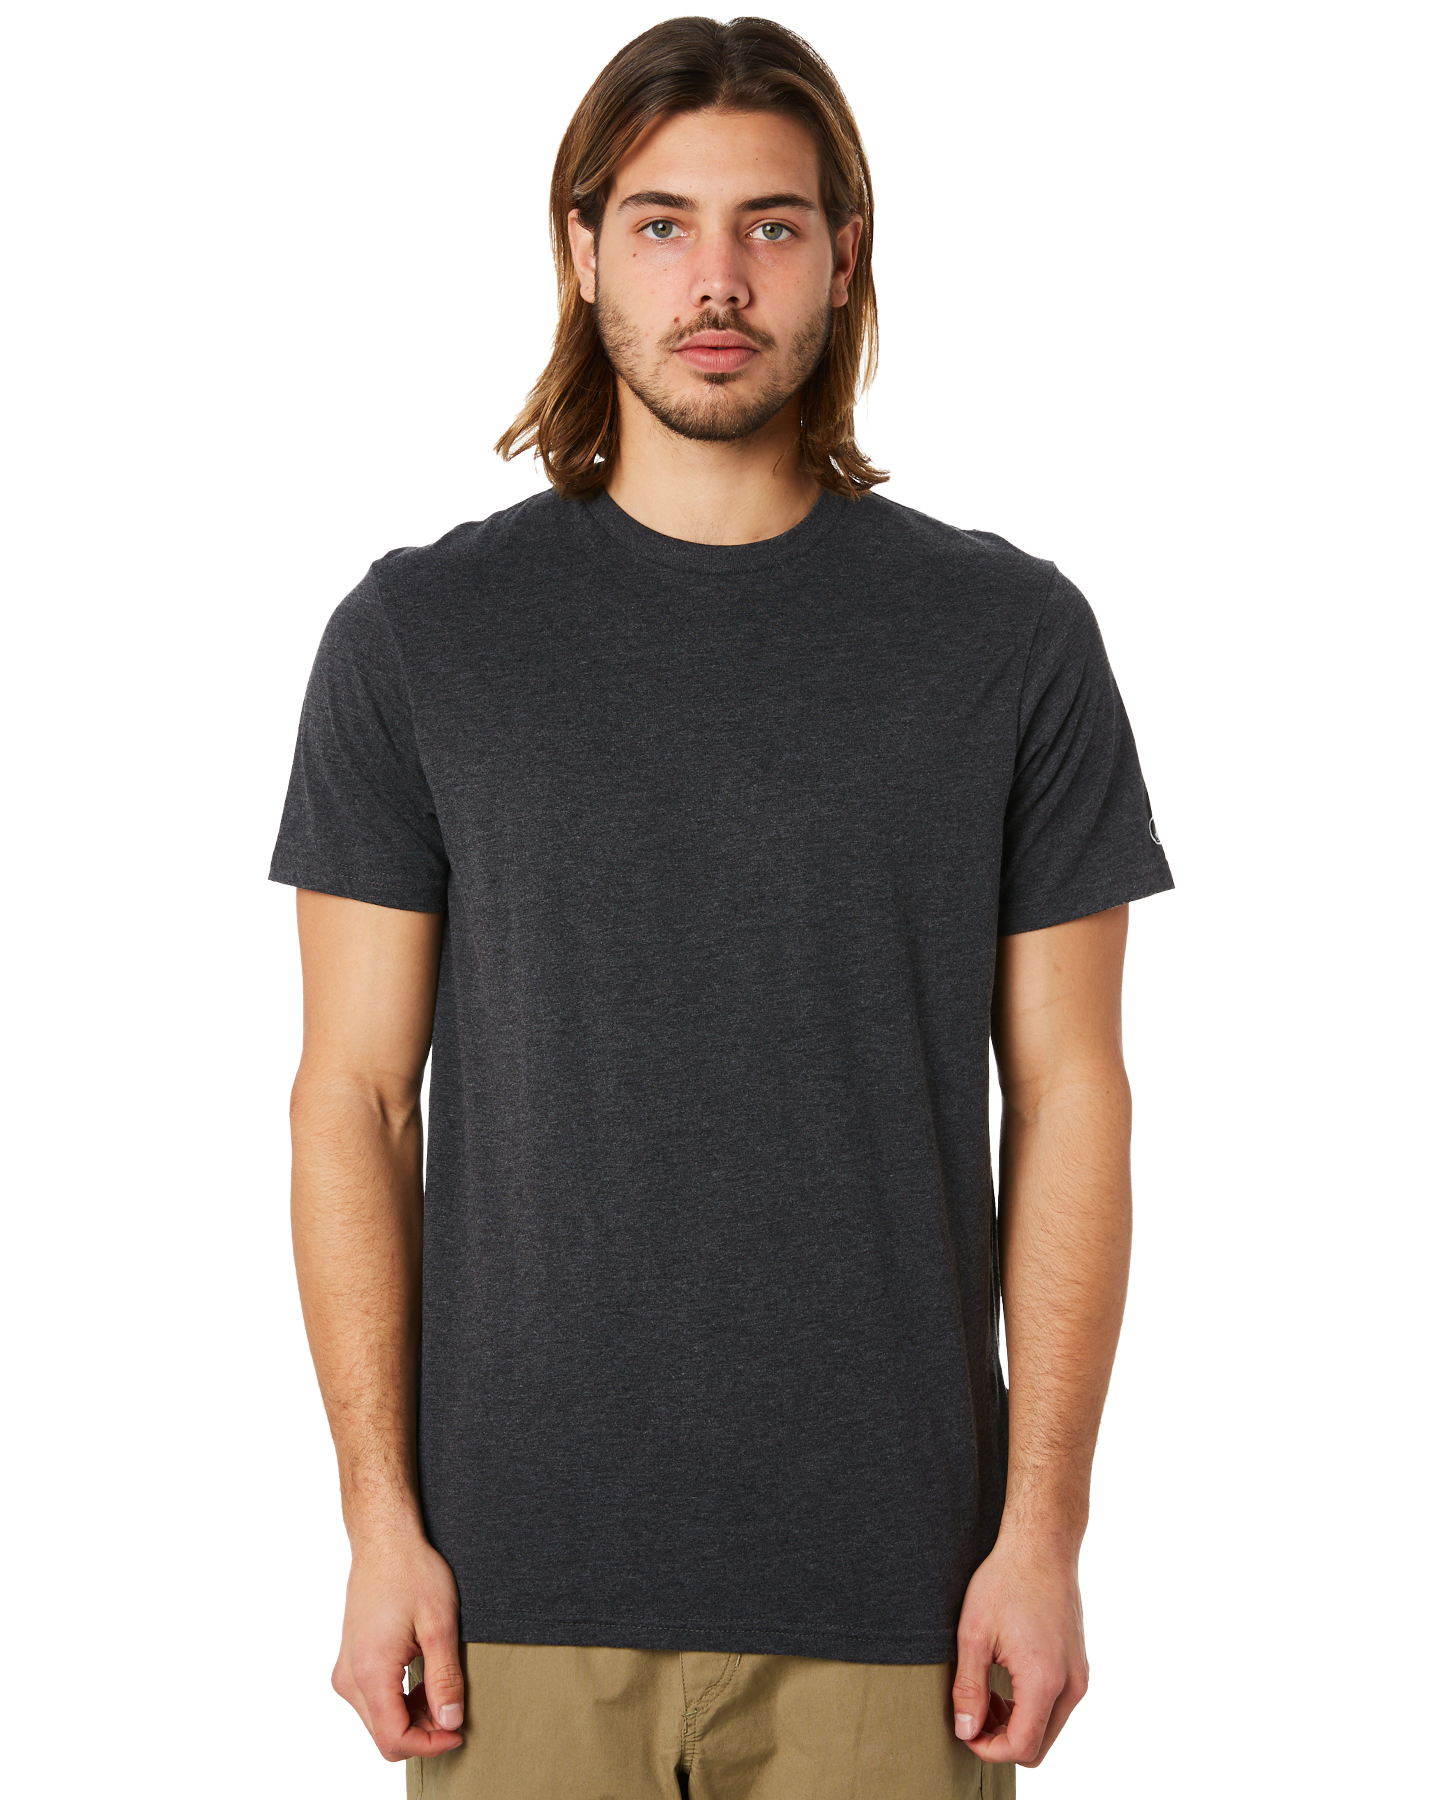 Volcom Solid Ss Mens Tee - Charcoal Heather | SurfStitch